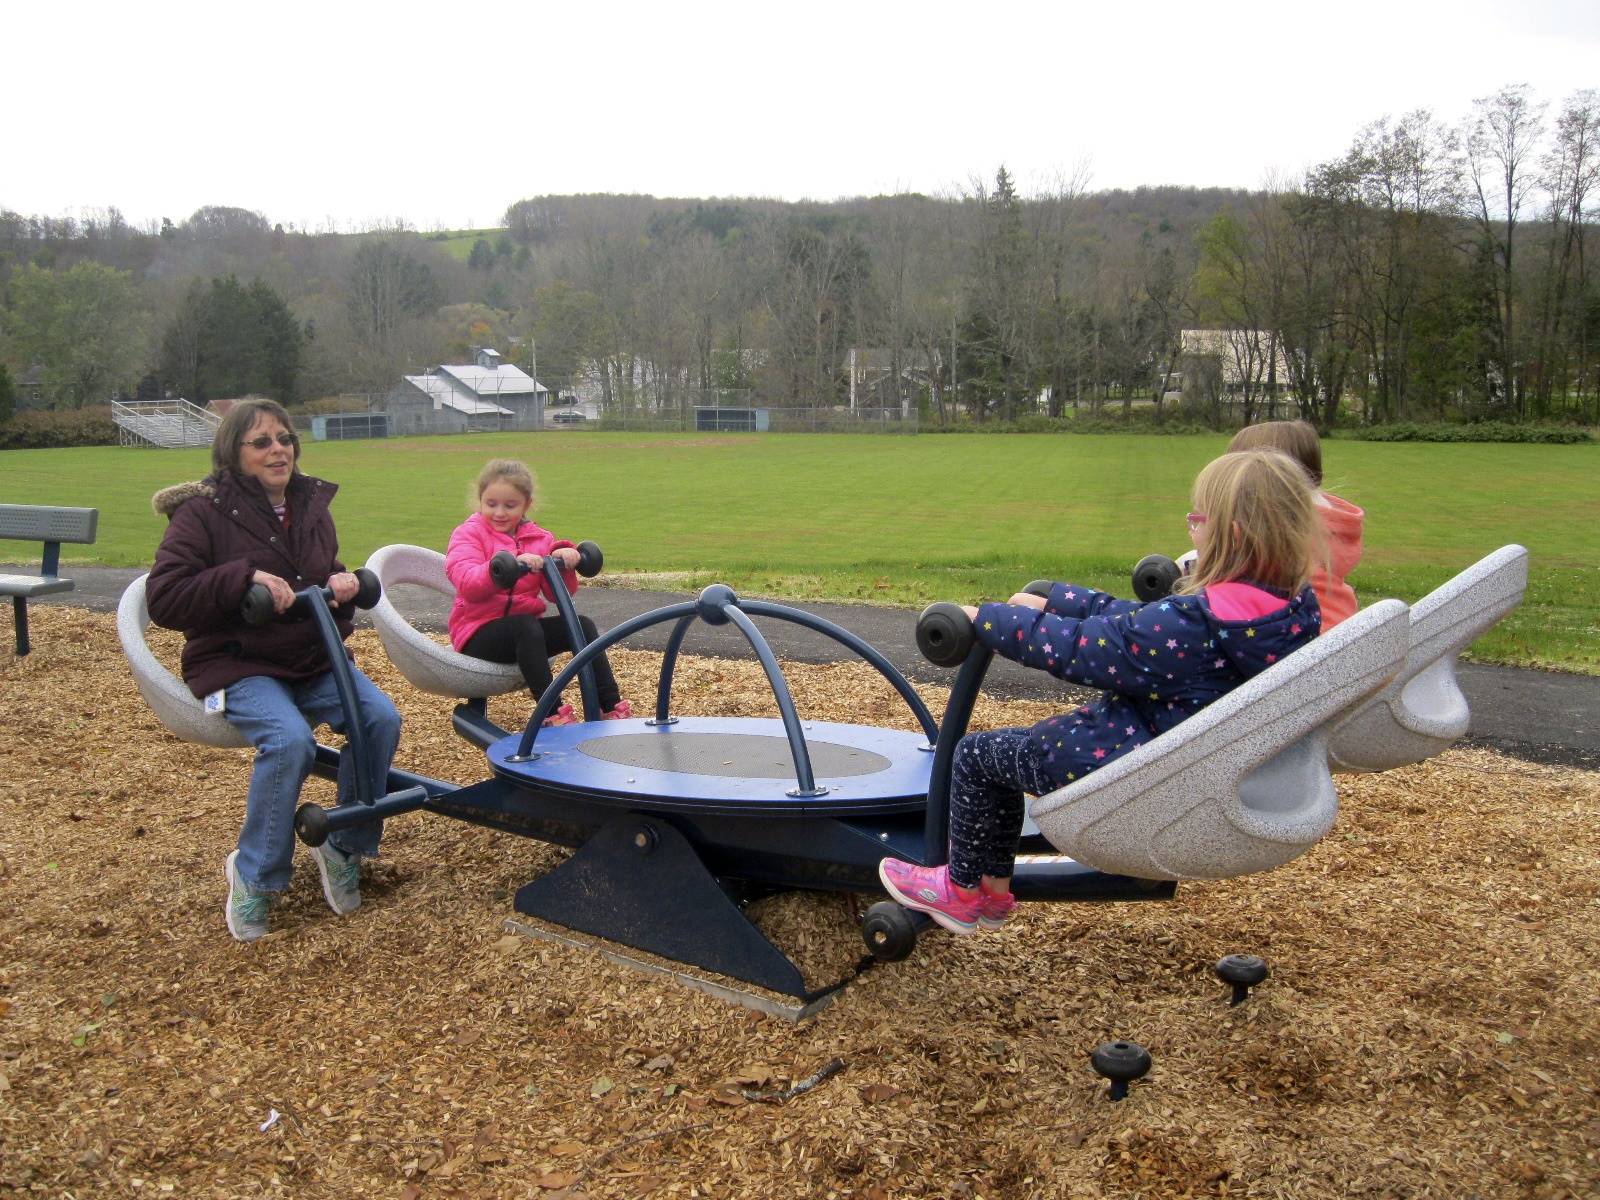 3 students and 1 adult on the teeter totter.